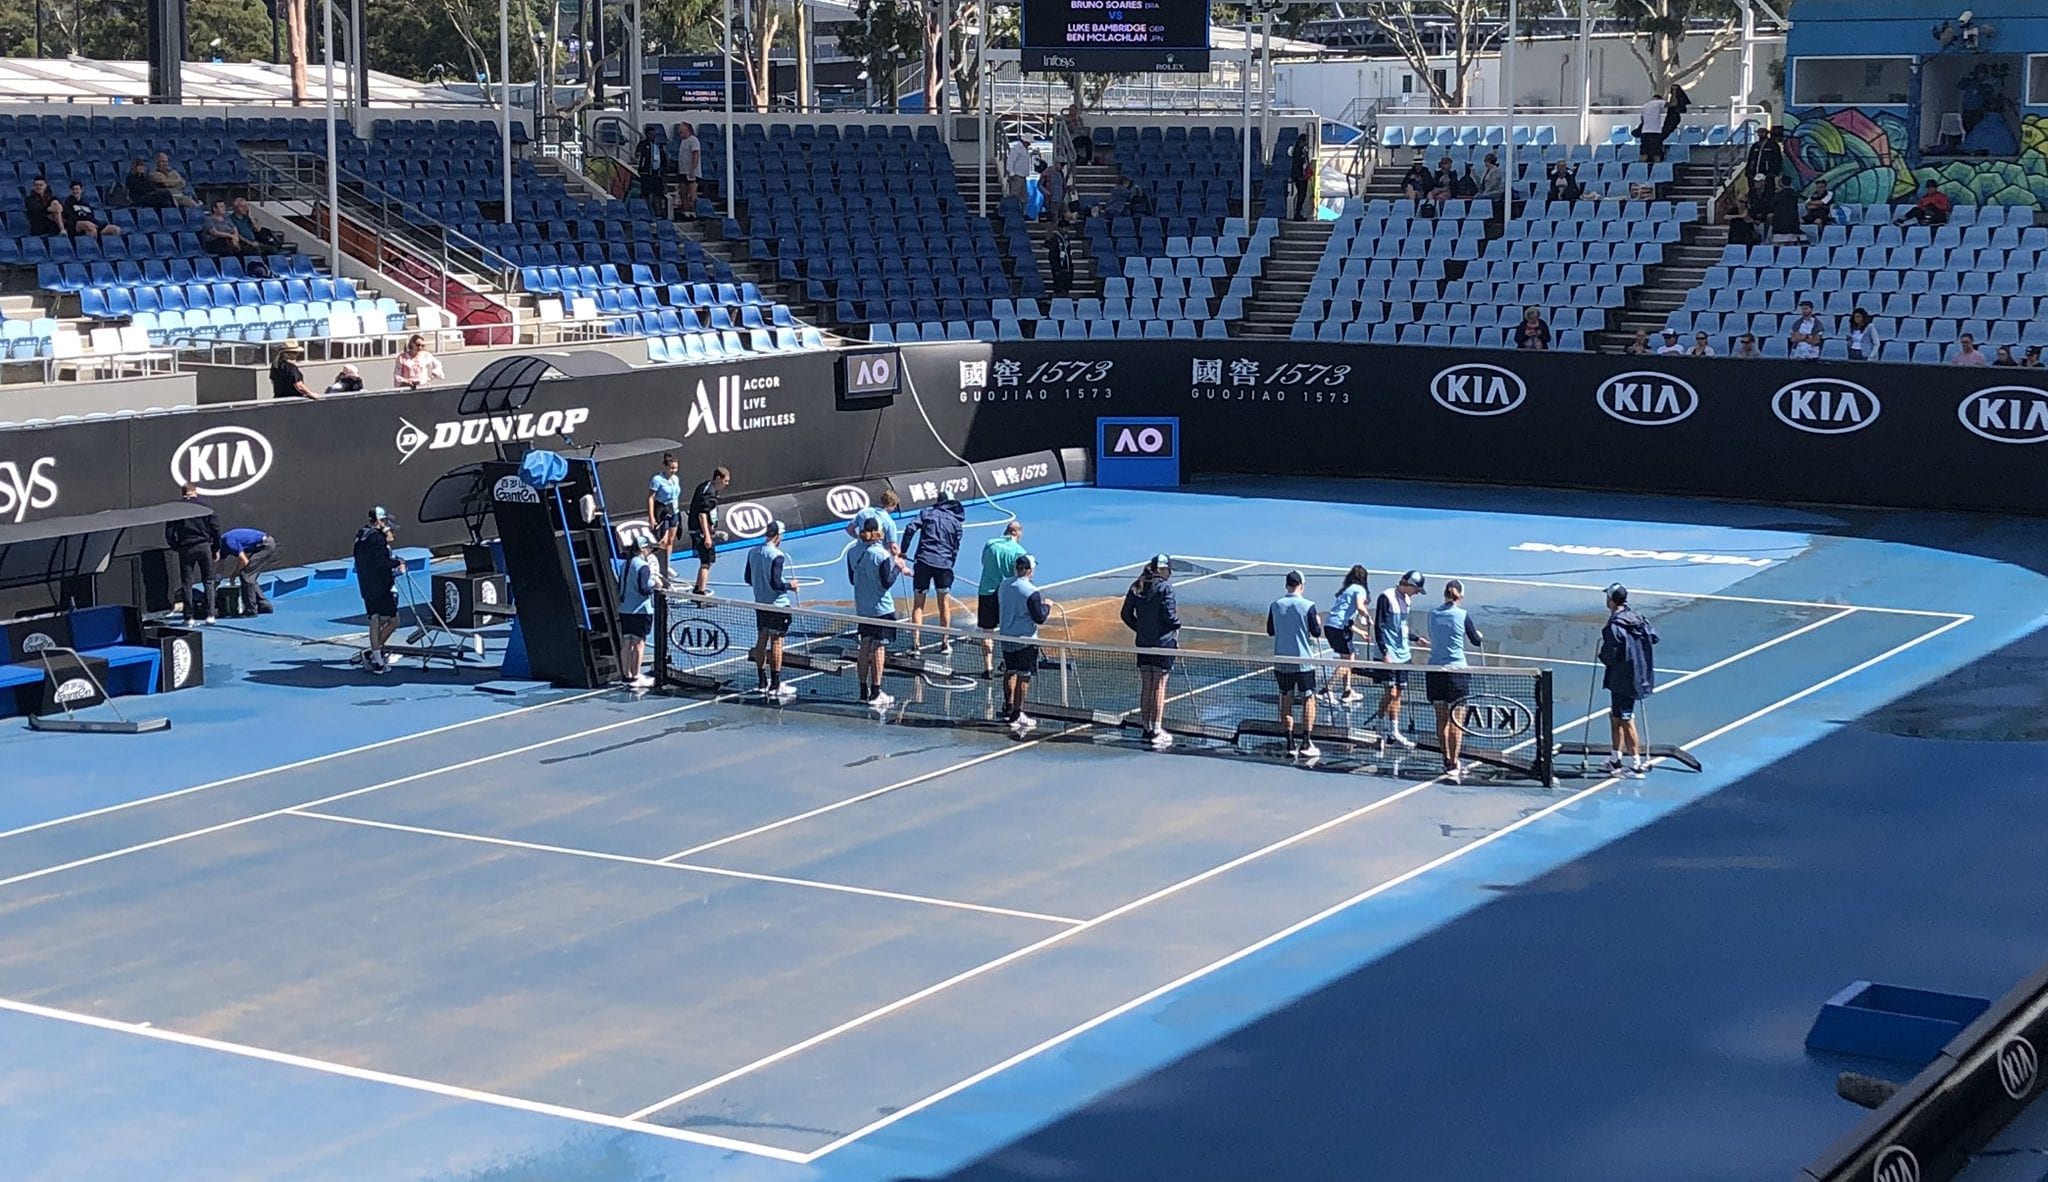 Australian Open faces new challenge after rains leave courts dirty, unplayable